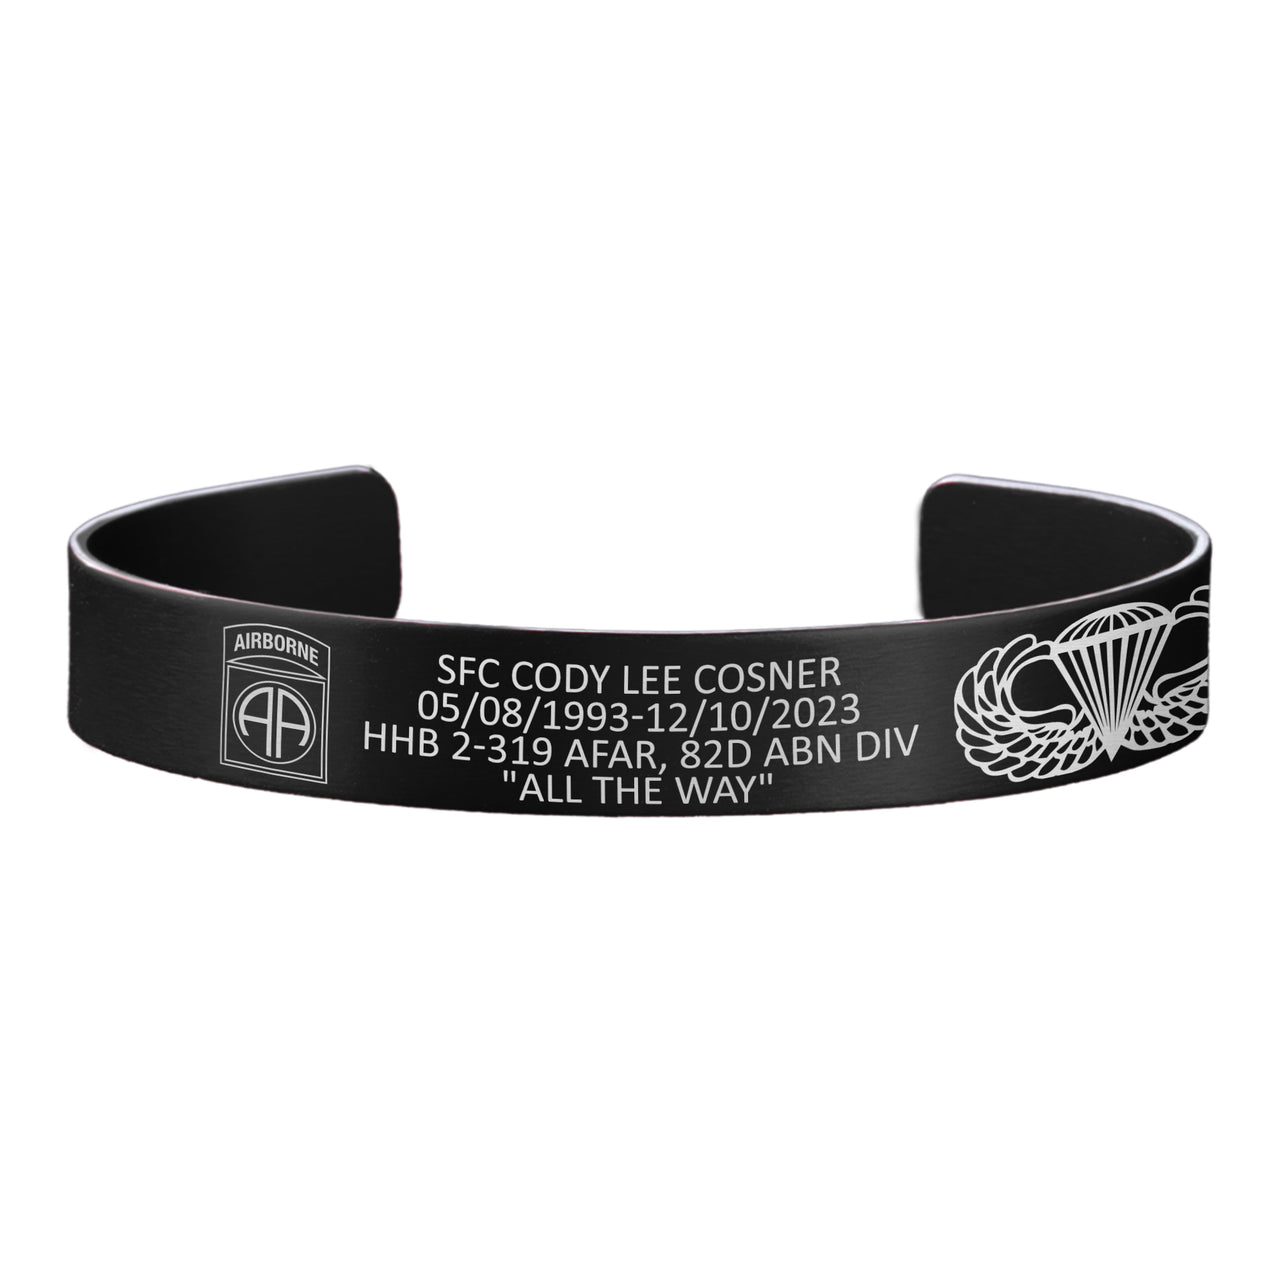 SFC Cody Collett Cosner Memorial Band – Hosted by the Collett Family